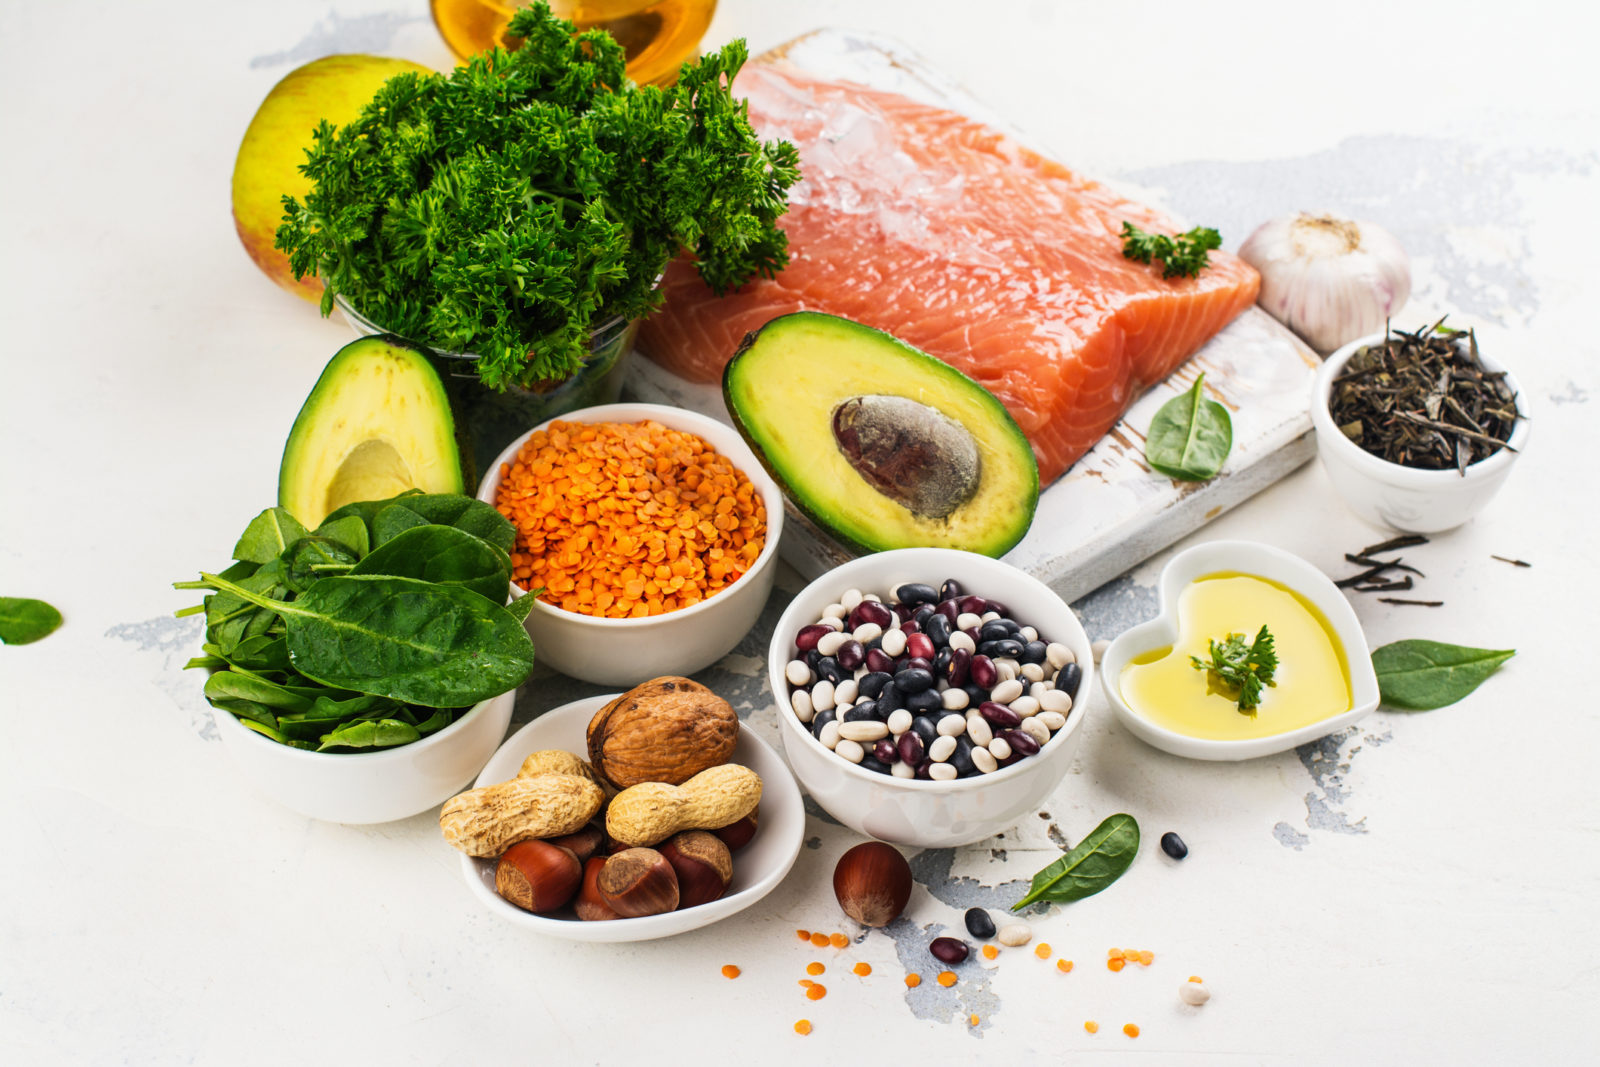 a sampling of healthy foods, including salmon, avocado, spinach, nuts and berries